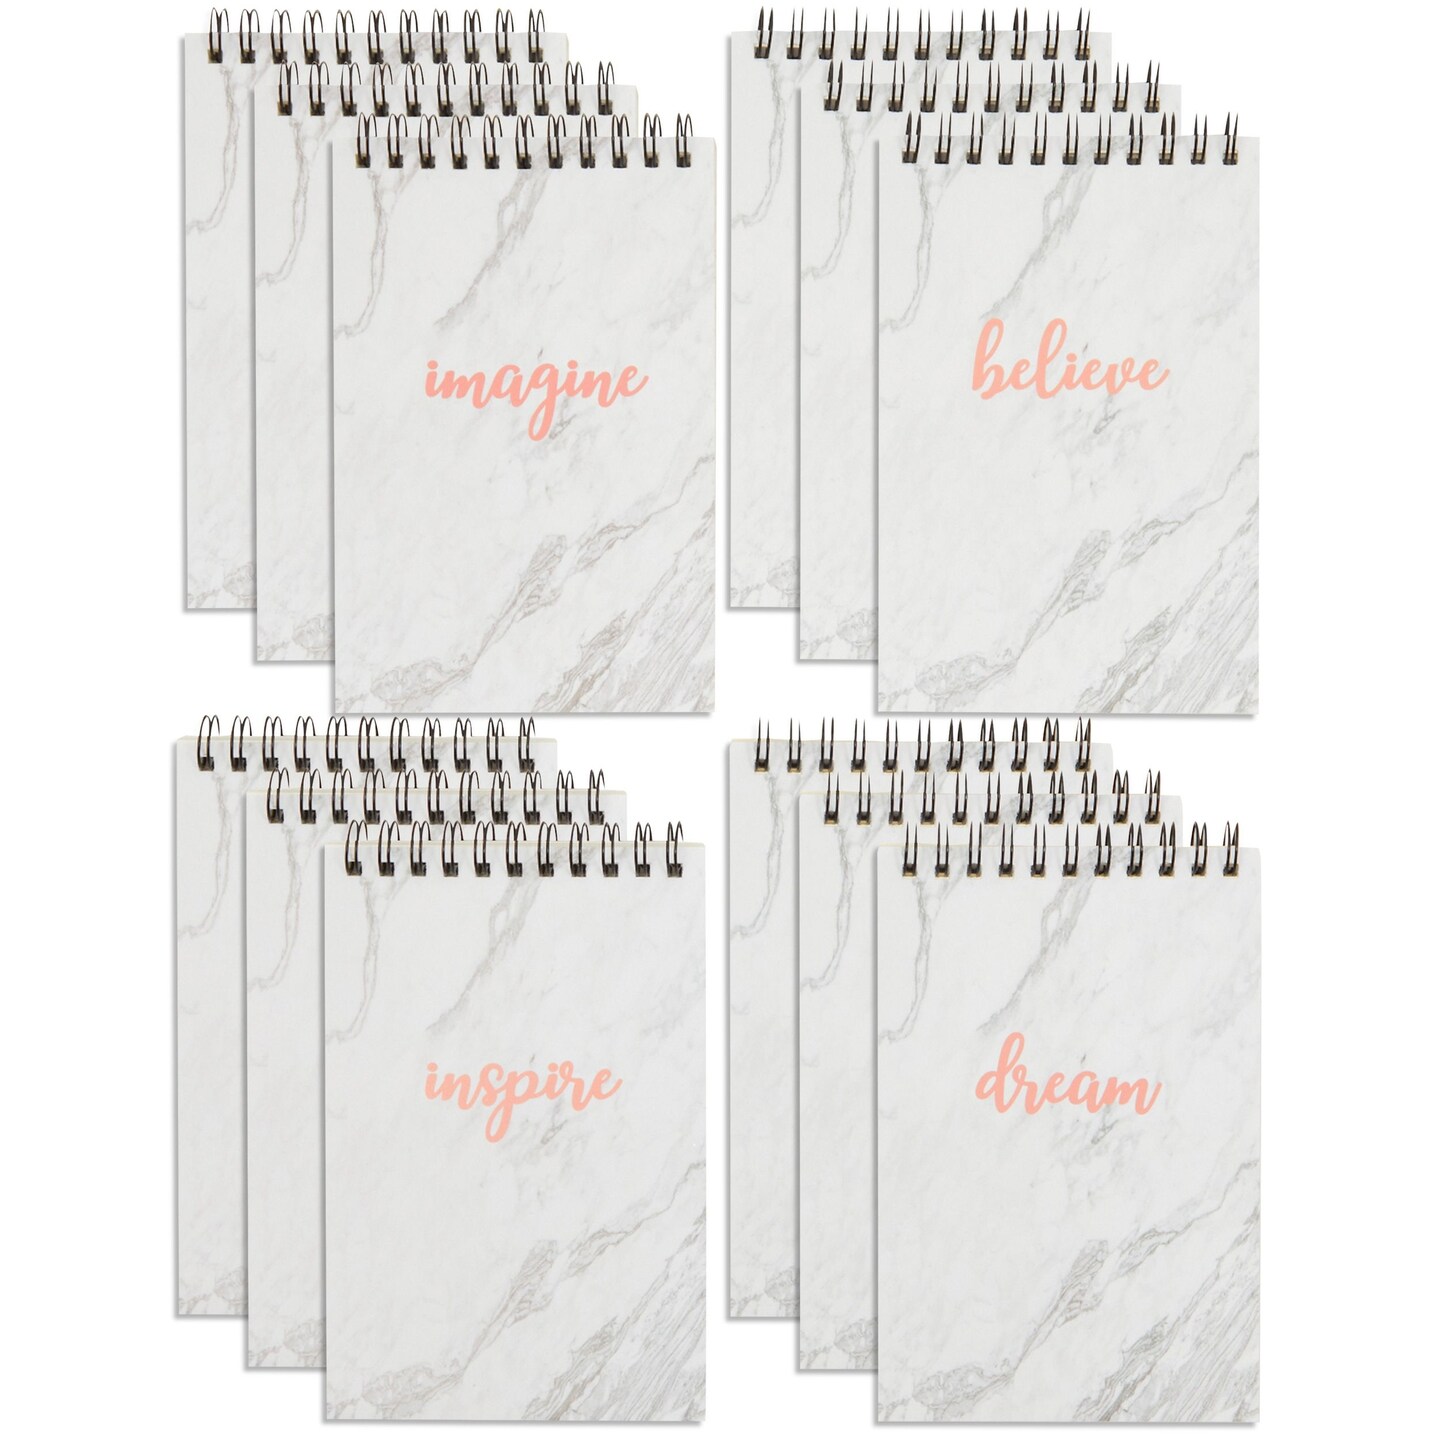 12 Pack Small Spiral Bound Motivational Notebooks, Bulk Marble Rose Gold Note Pads, 50 Sheets Each (4 x 6 In)